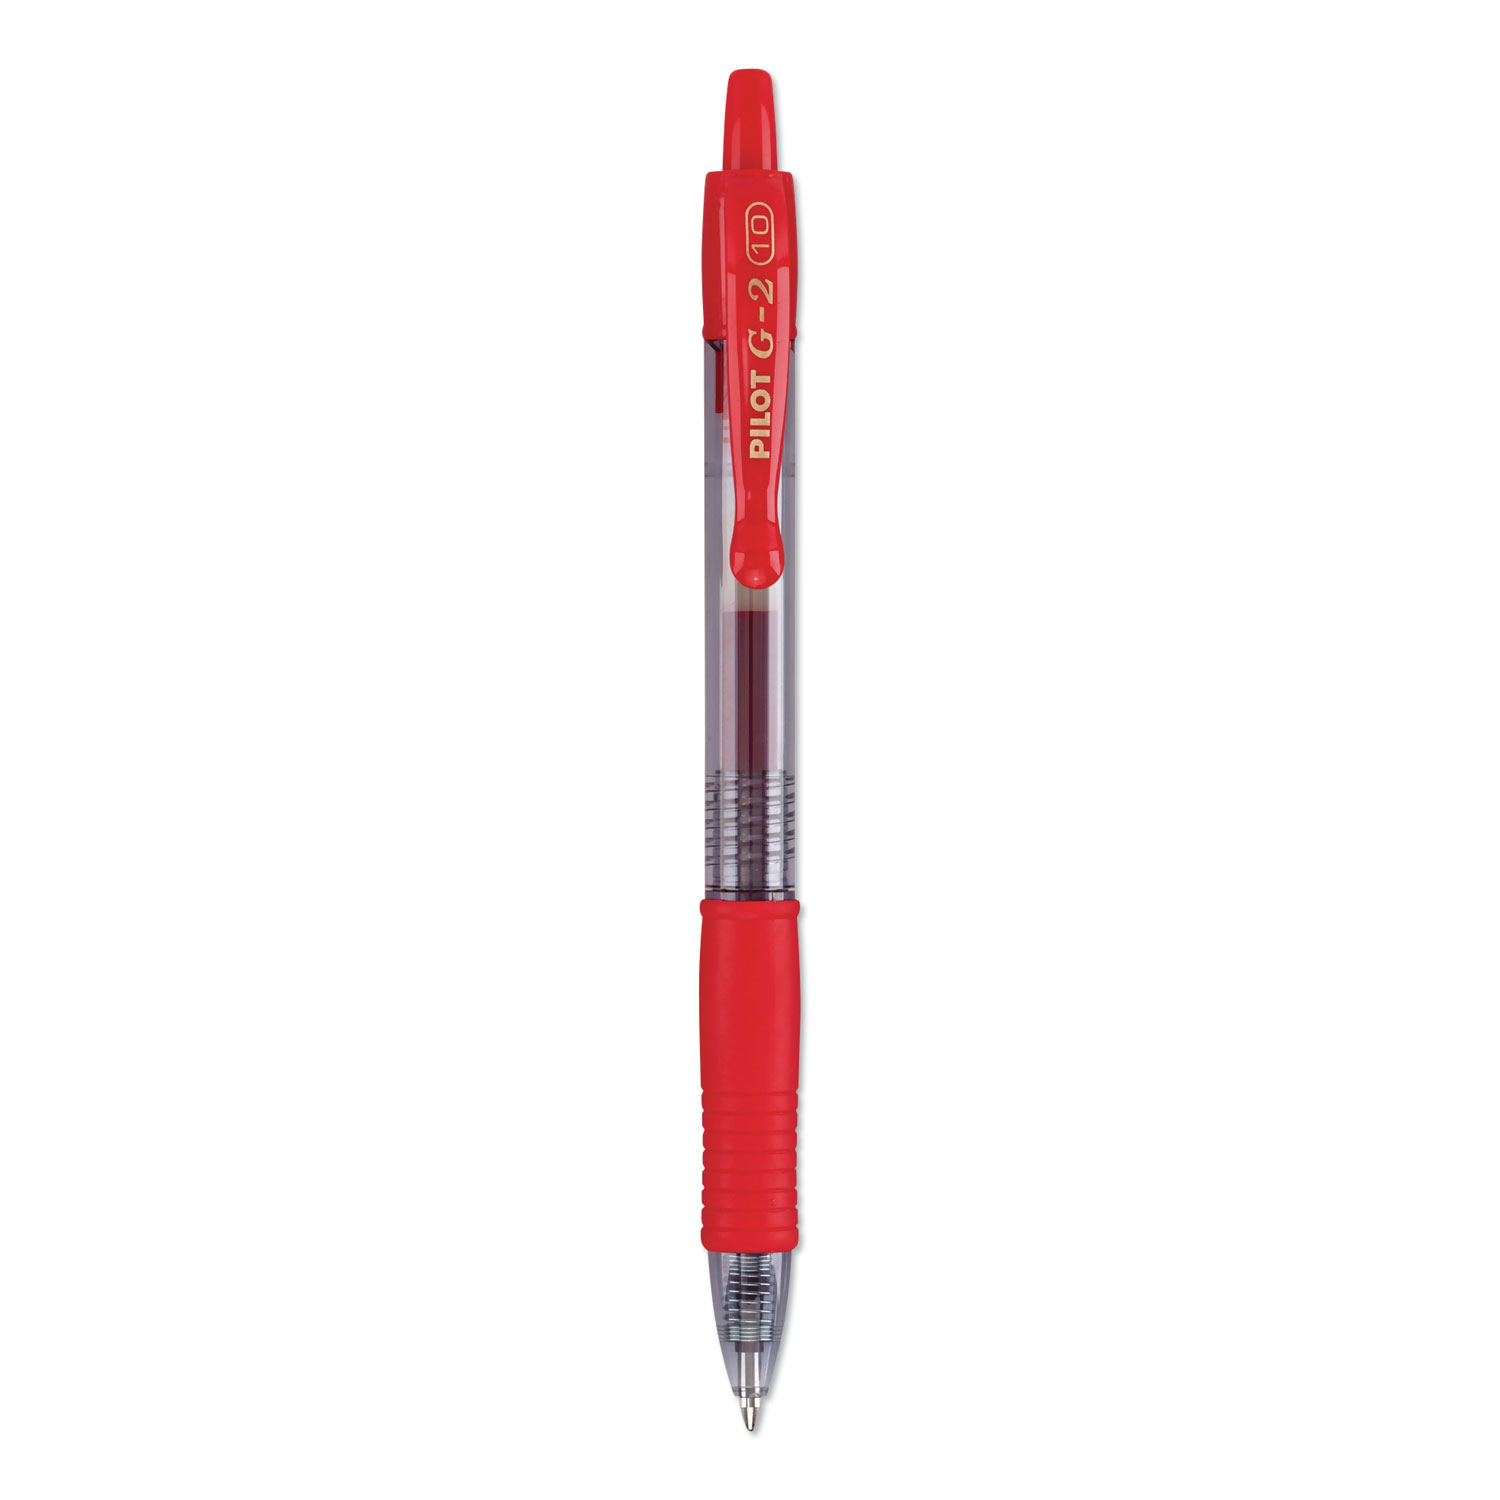 G2 Premium Gel Pen, Retractable, Bold 1 mm, Red Ink, Smoke/Red Barrel,  Dozen - BOSS Office and Computer Products